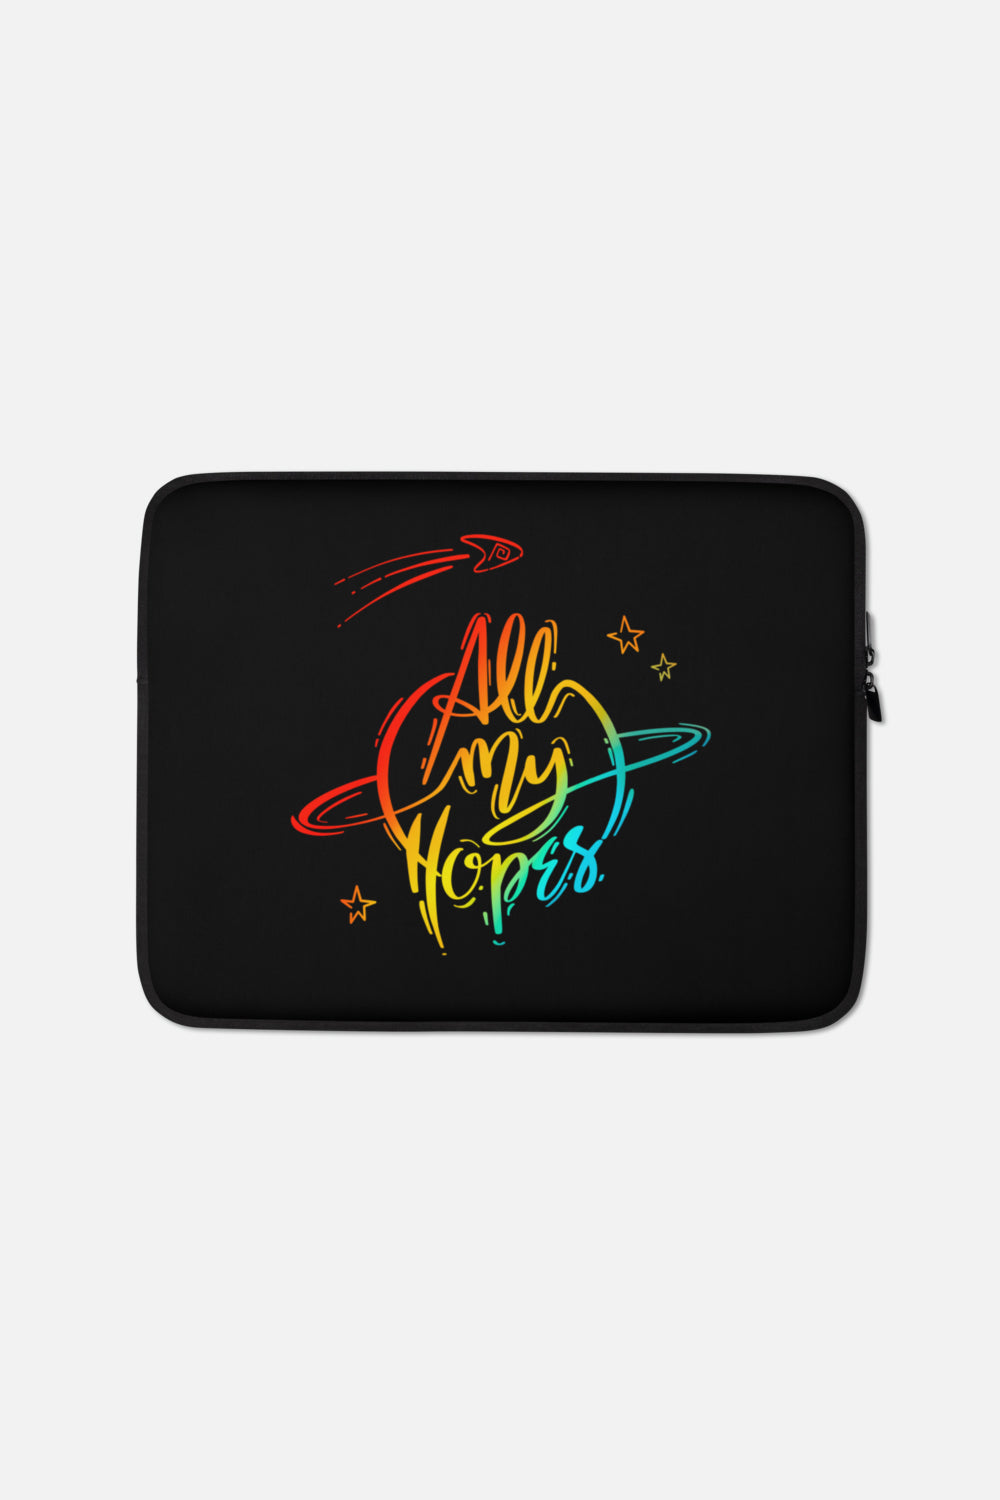 All My Hopes Laptop Sleeve - 13 or 15 inch